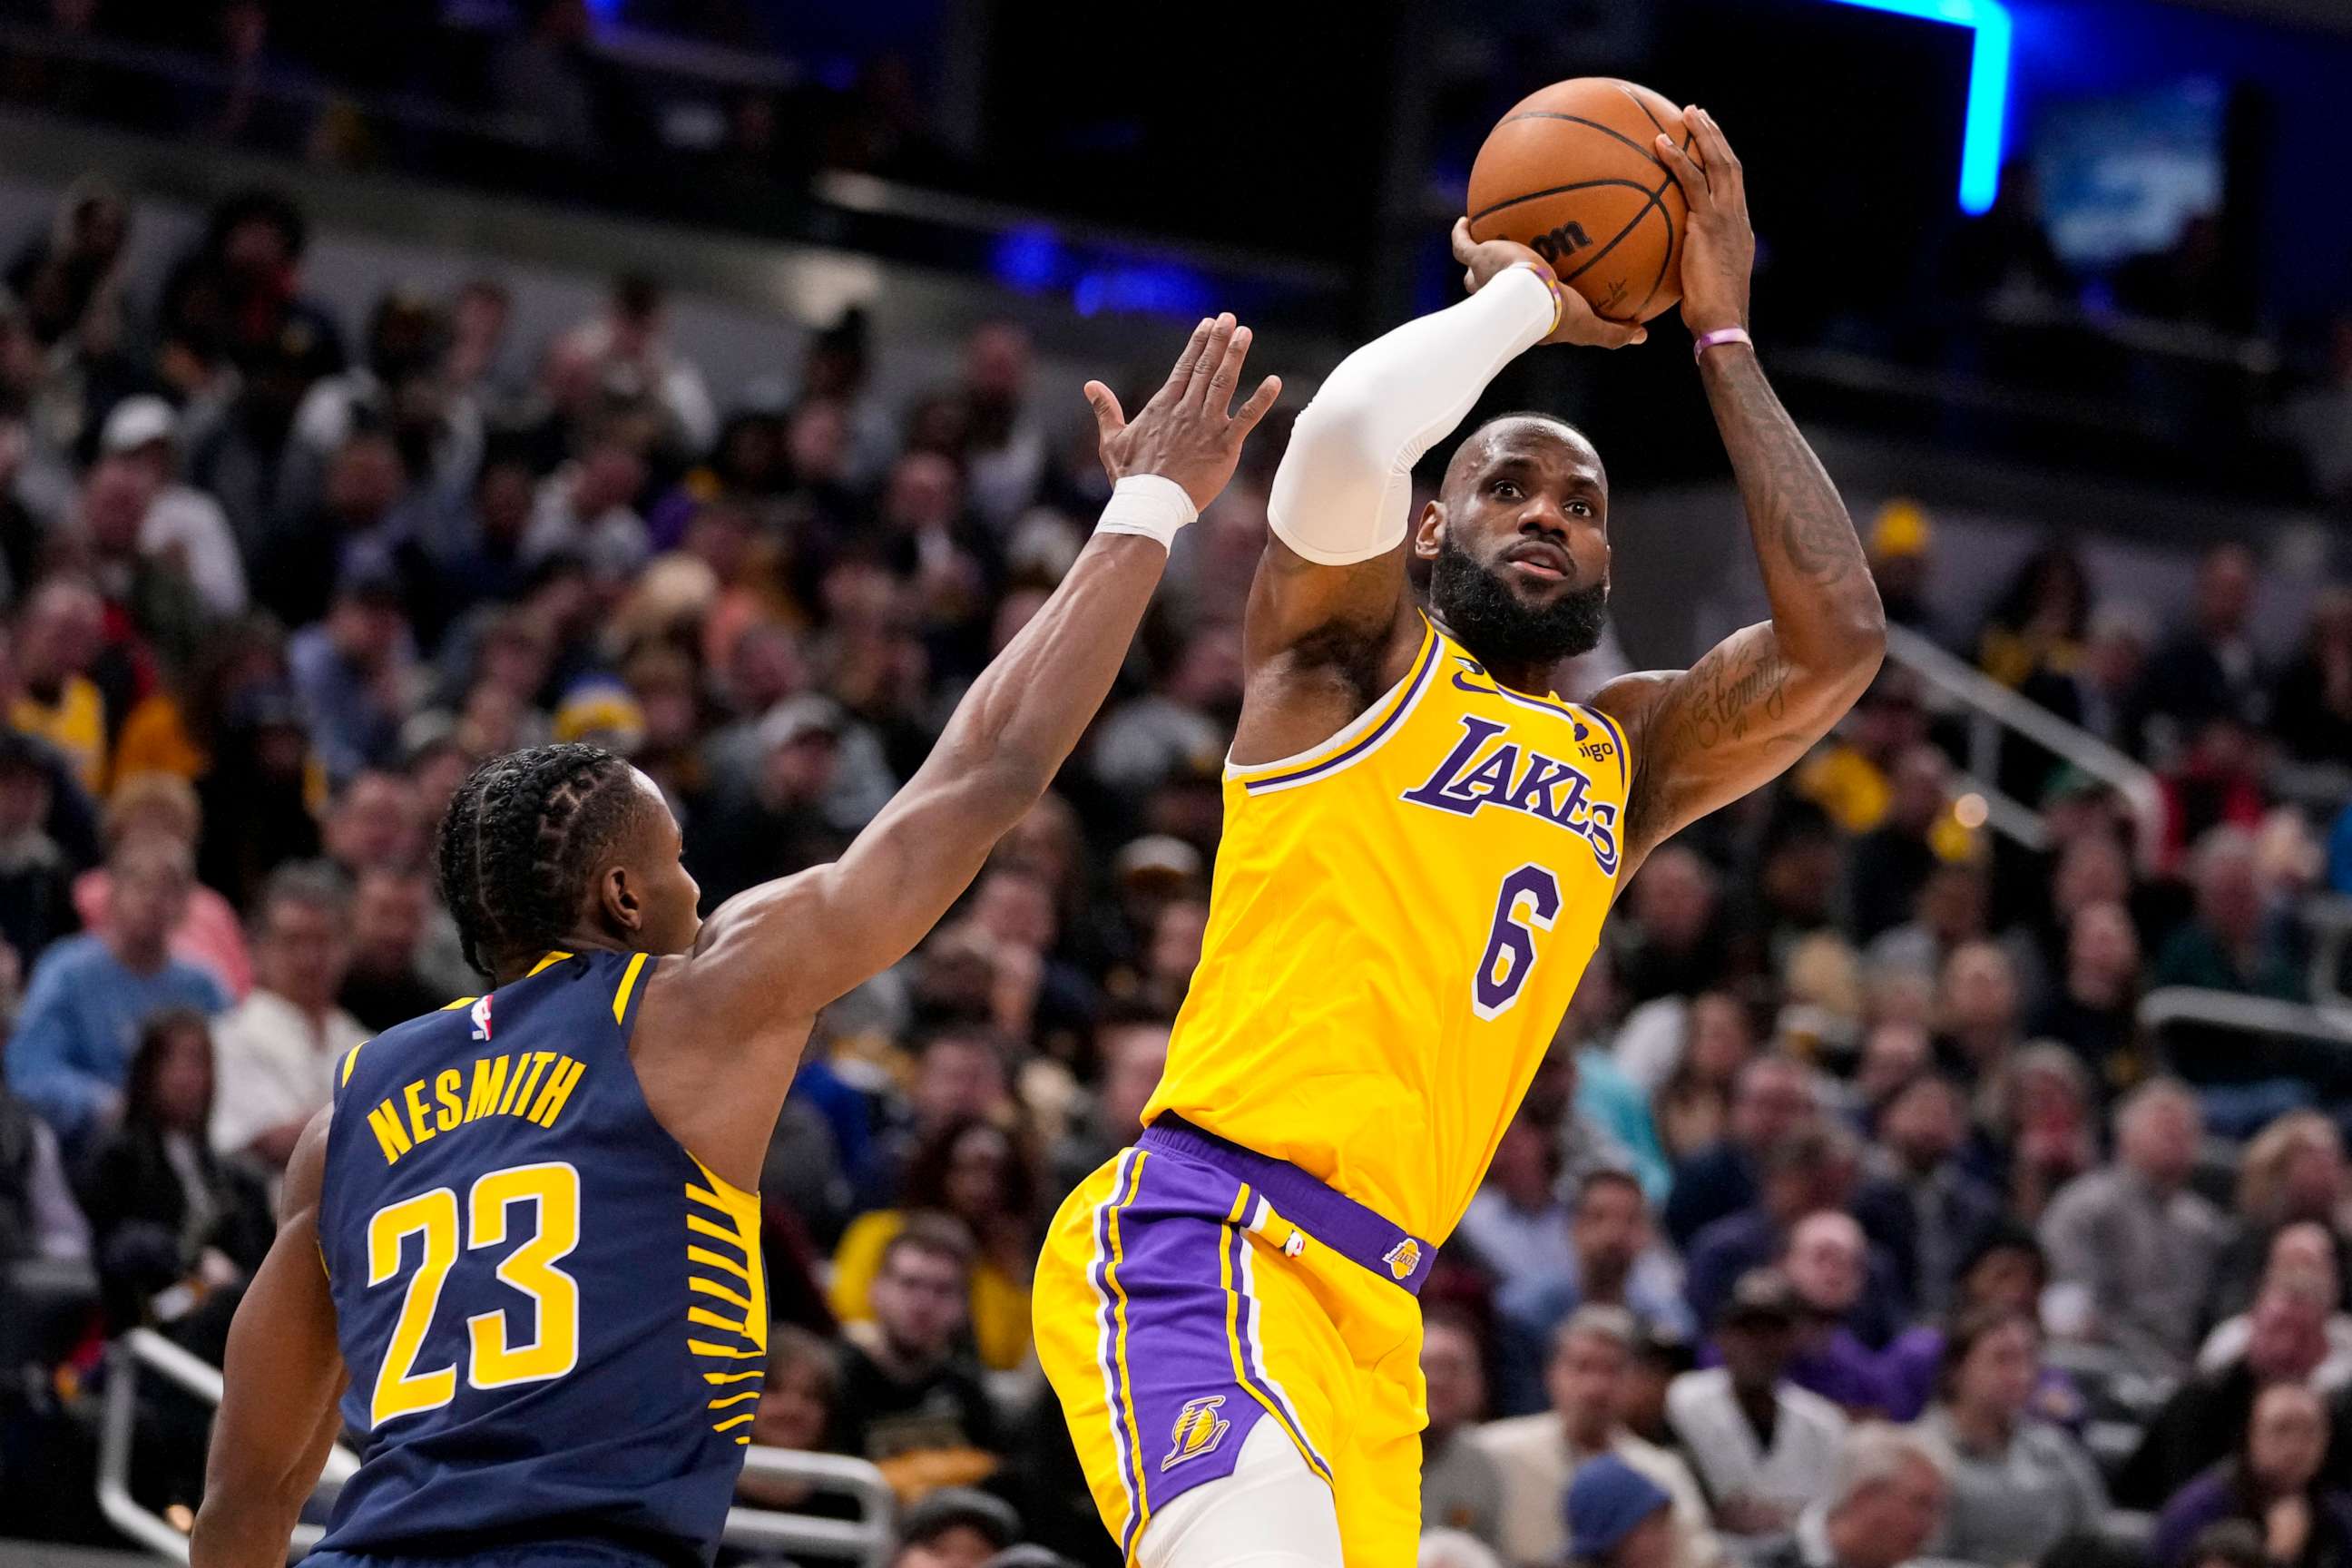 PHOTO: Los Angeles Lakers forward LeBron James (6) shoots over Indiana Pacers forward Aaron Nesmith (23) during the first half of an NBA basketball game in Indianapolis, Feb. 2, 2023.